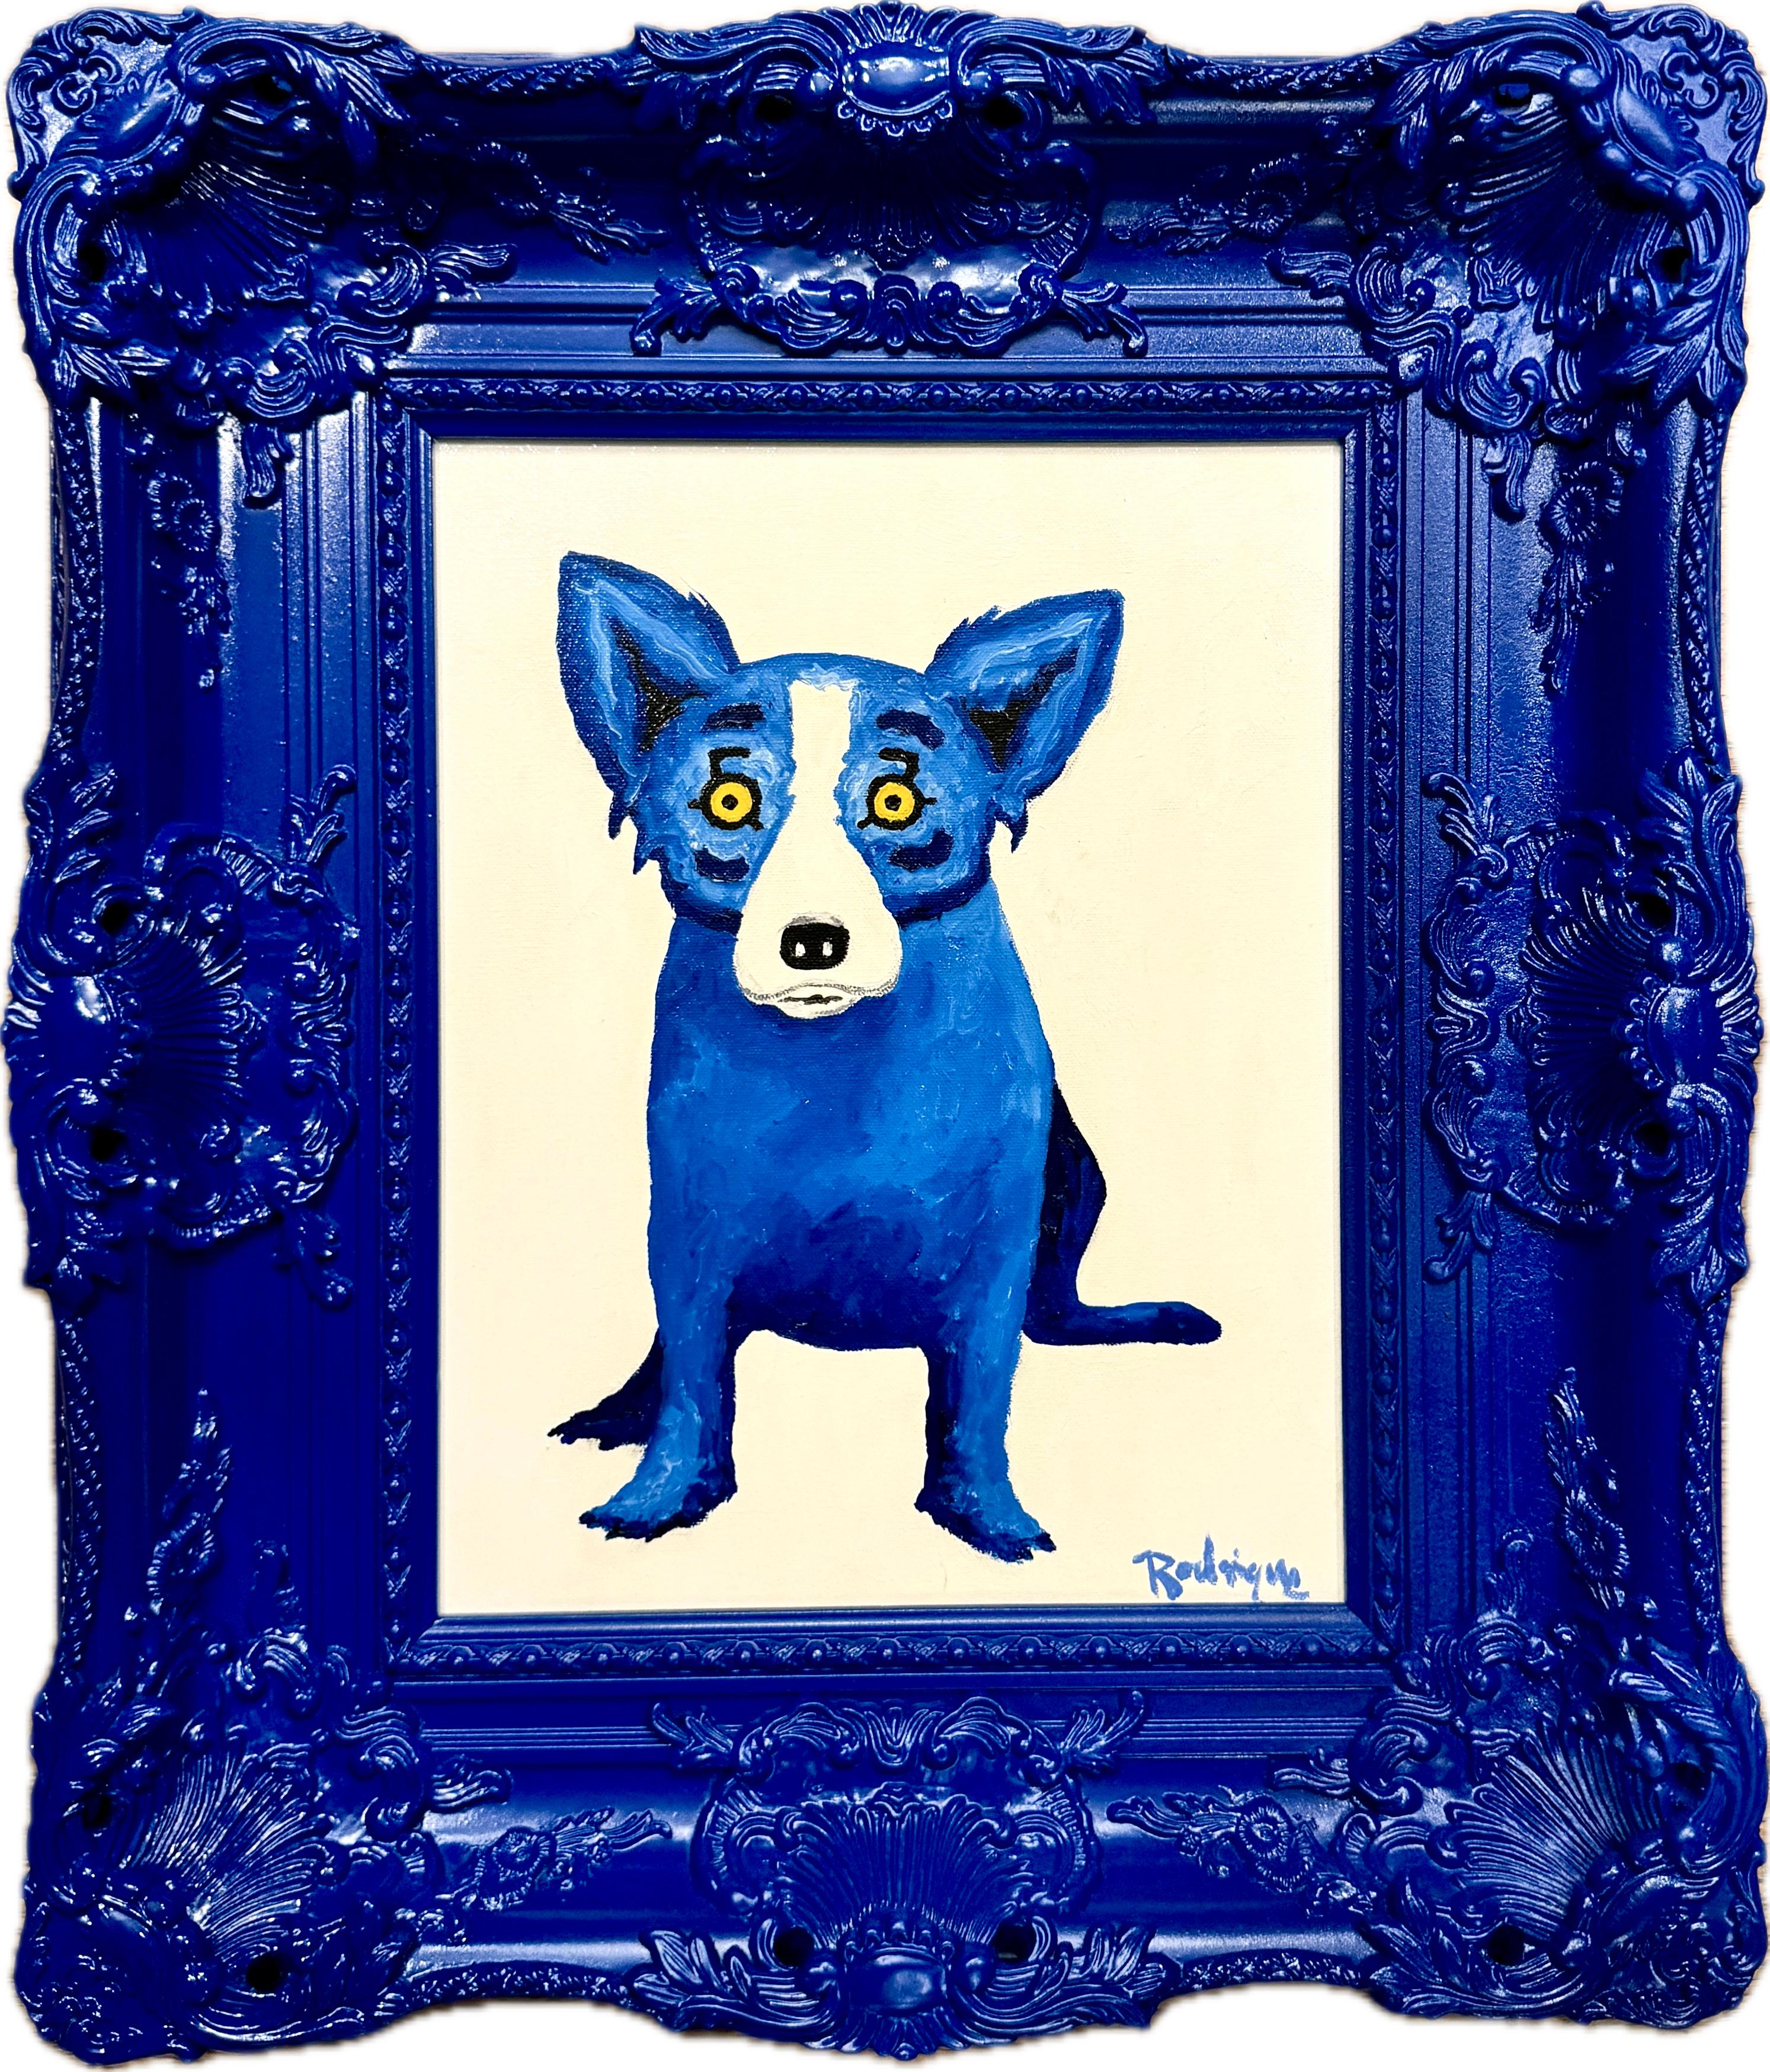 Blue Dog - Painting by George Rodrigue